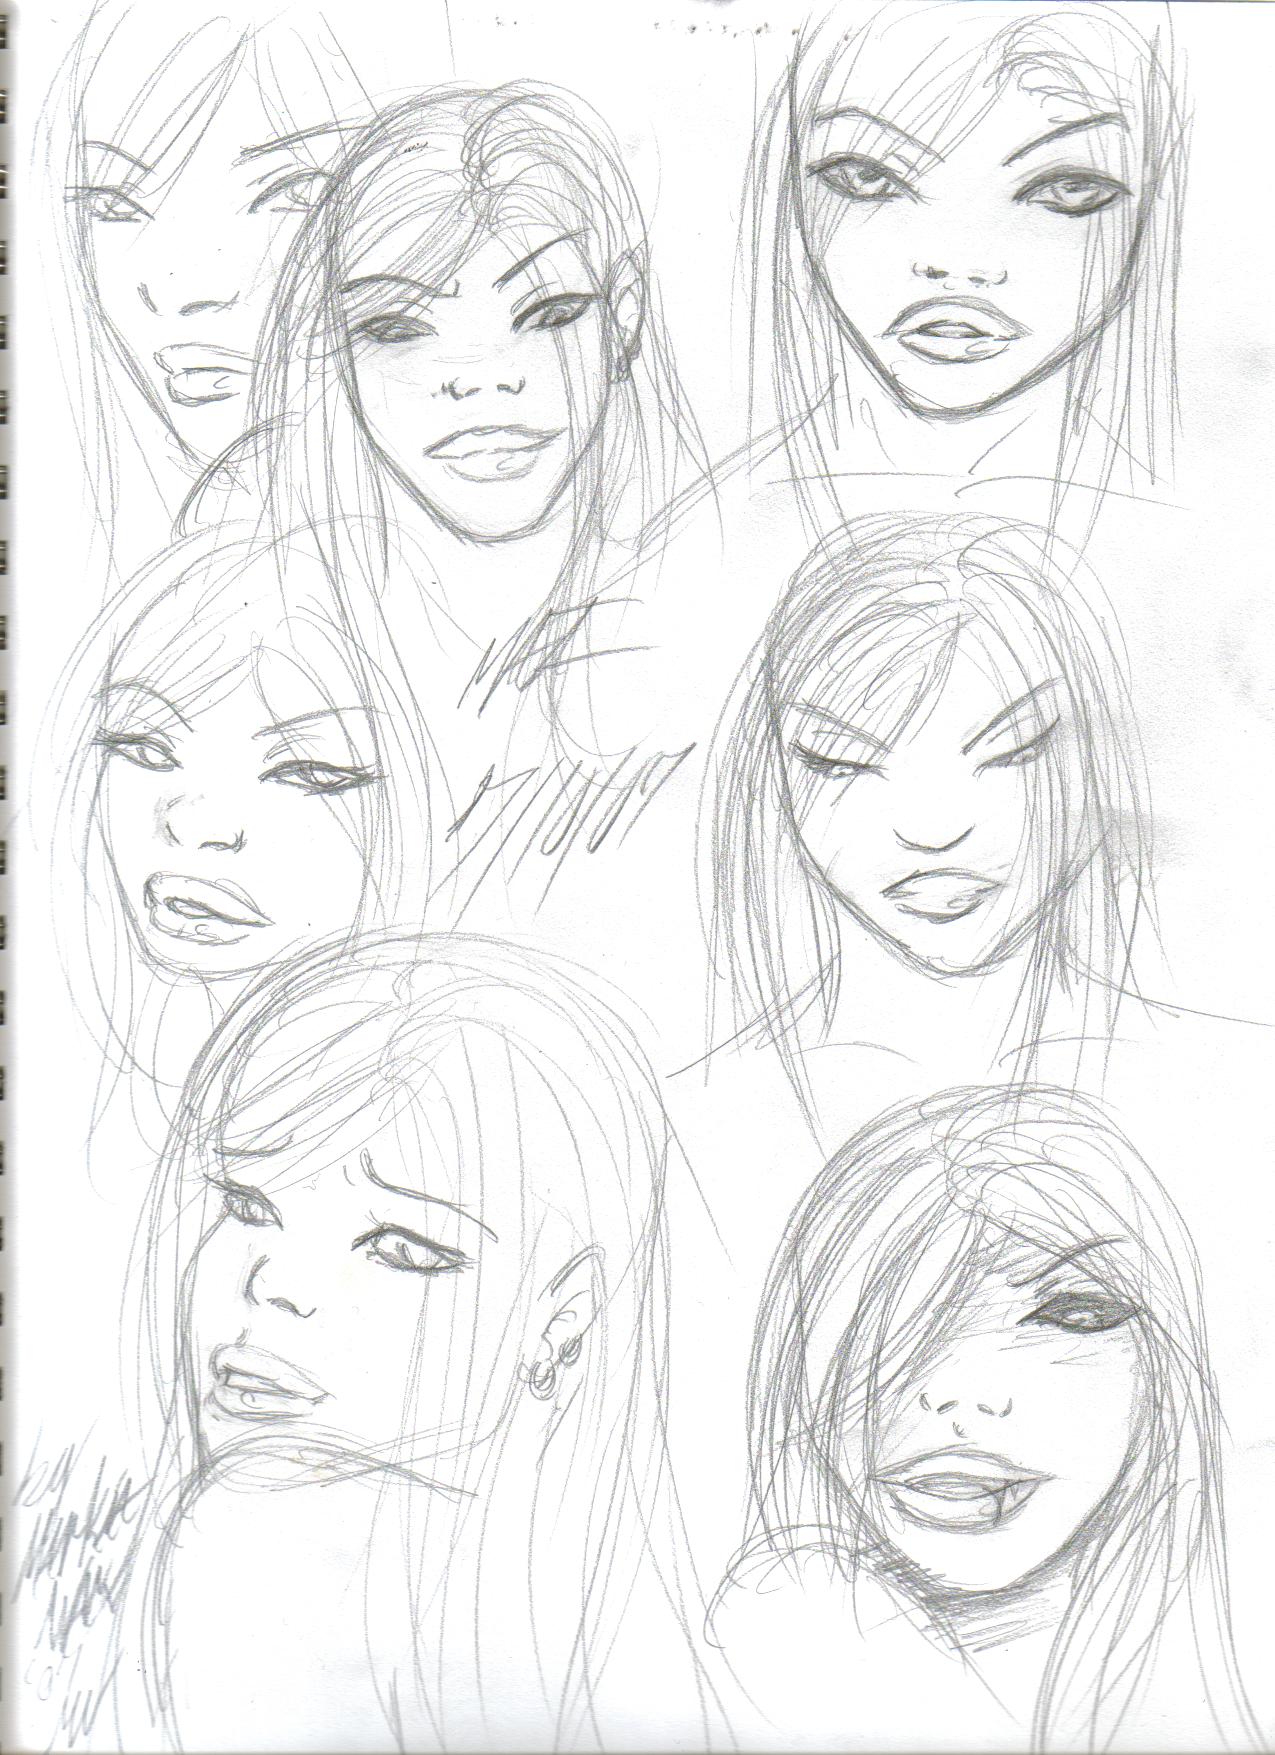 Mai sketches by MJW4ever